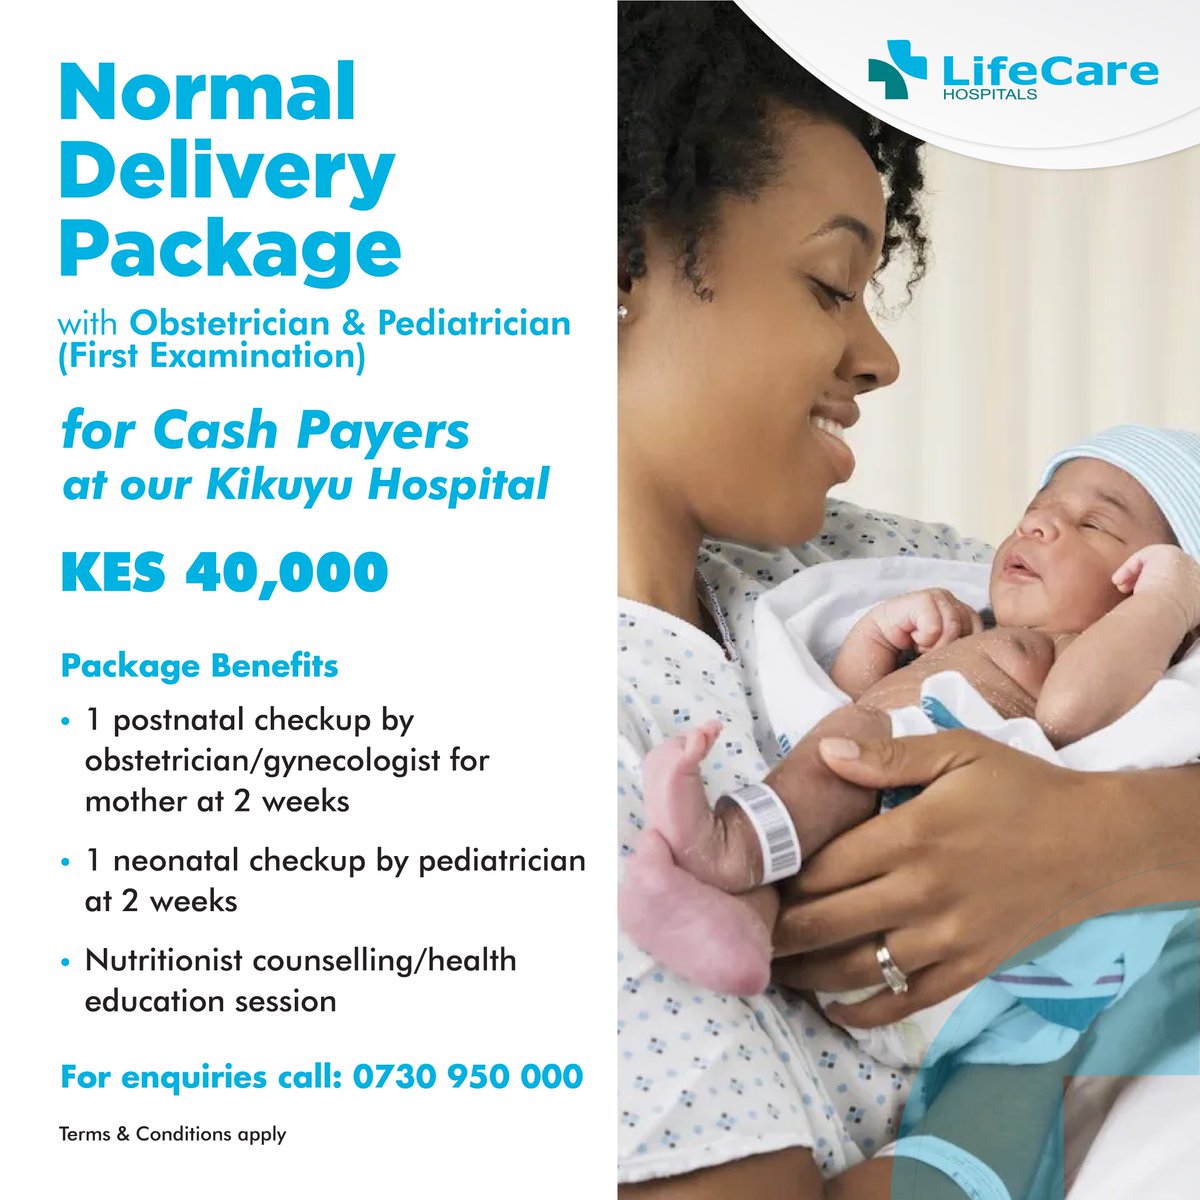 Experience the joy of motherhood at LifeCare Hospitals, Kikuyu! Our attractive delivery packages offer Caesarian and normal options at unbeatable prices. Contact us now! #LifeCareHospitals #MaternityPackages #HealthyMomHealthyBaby